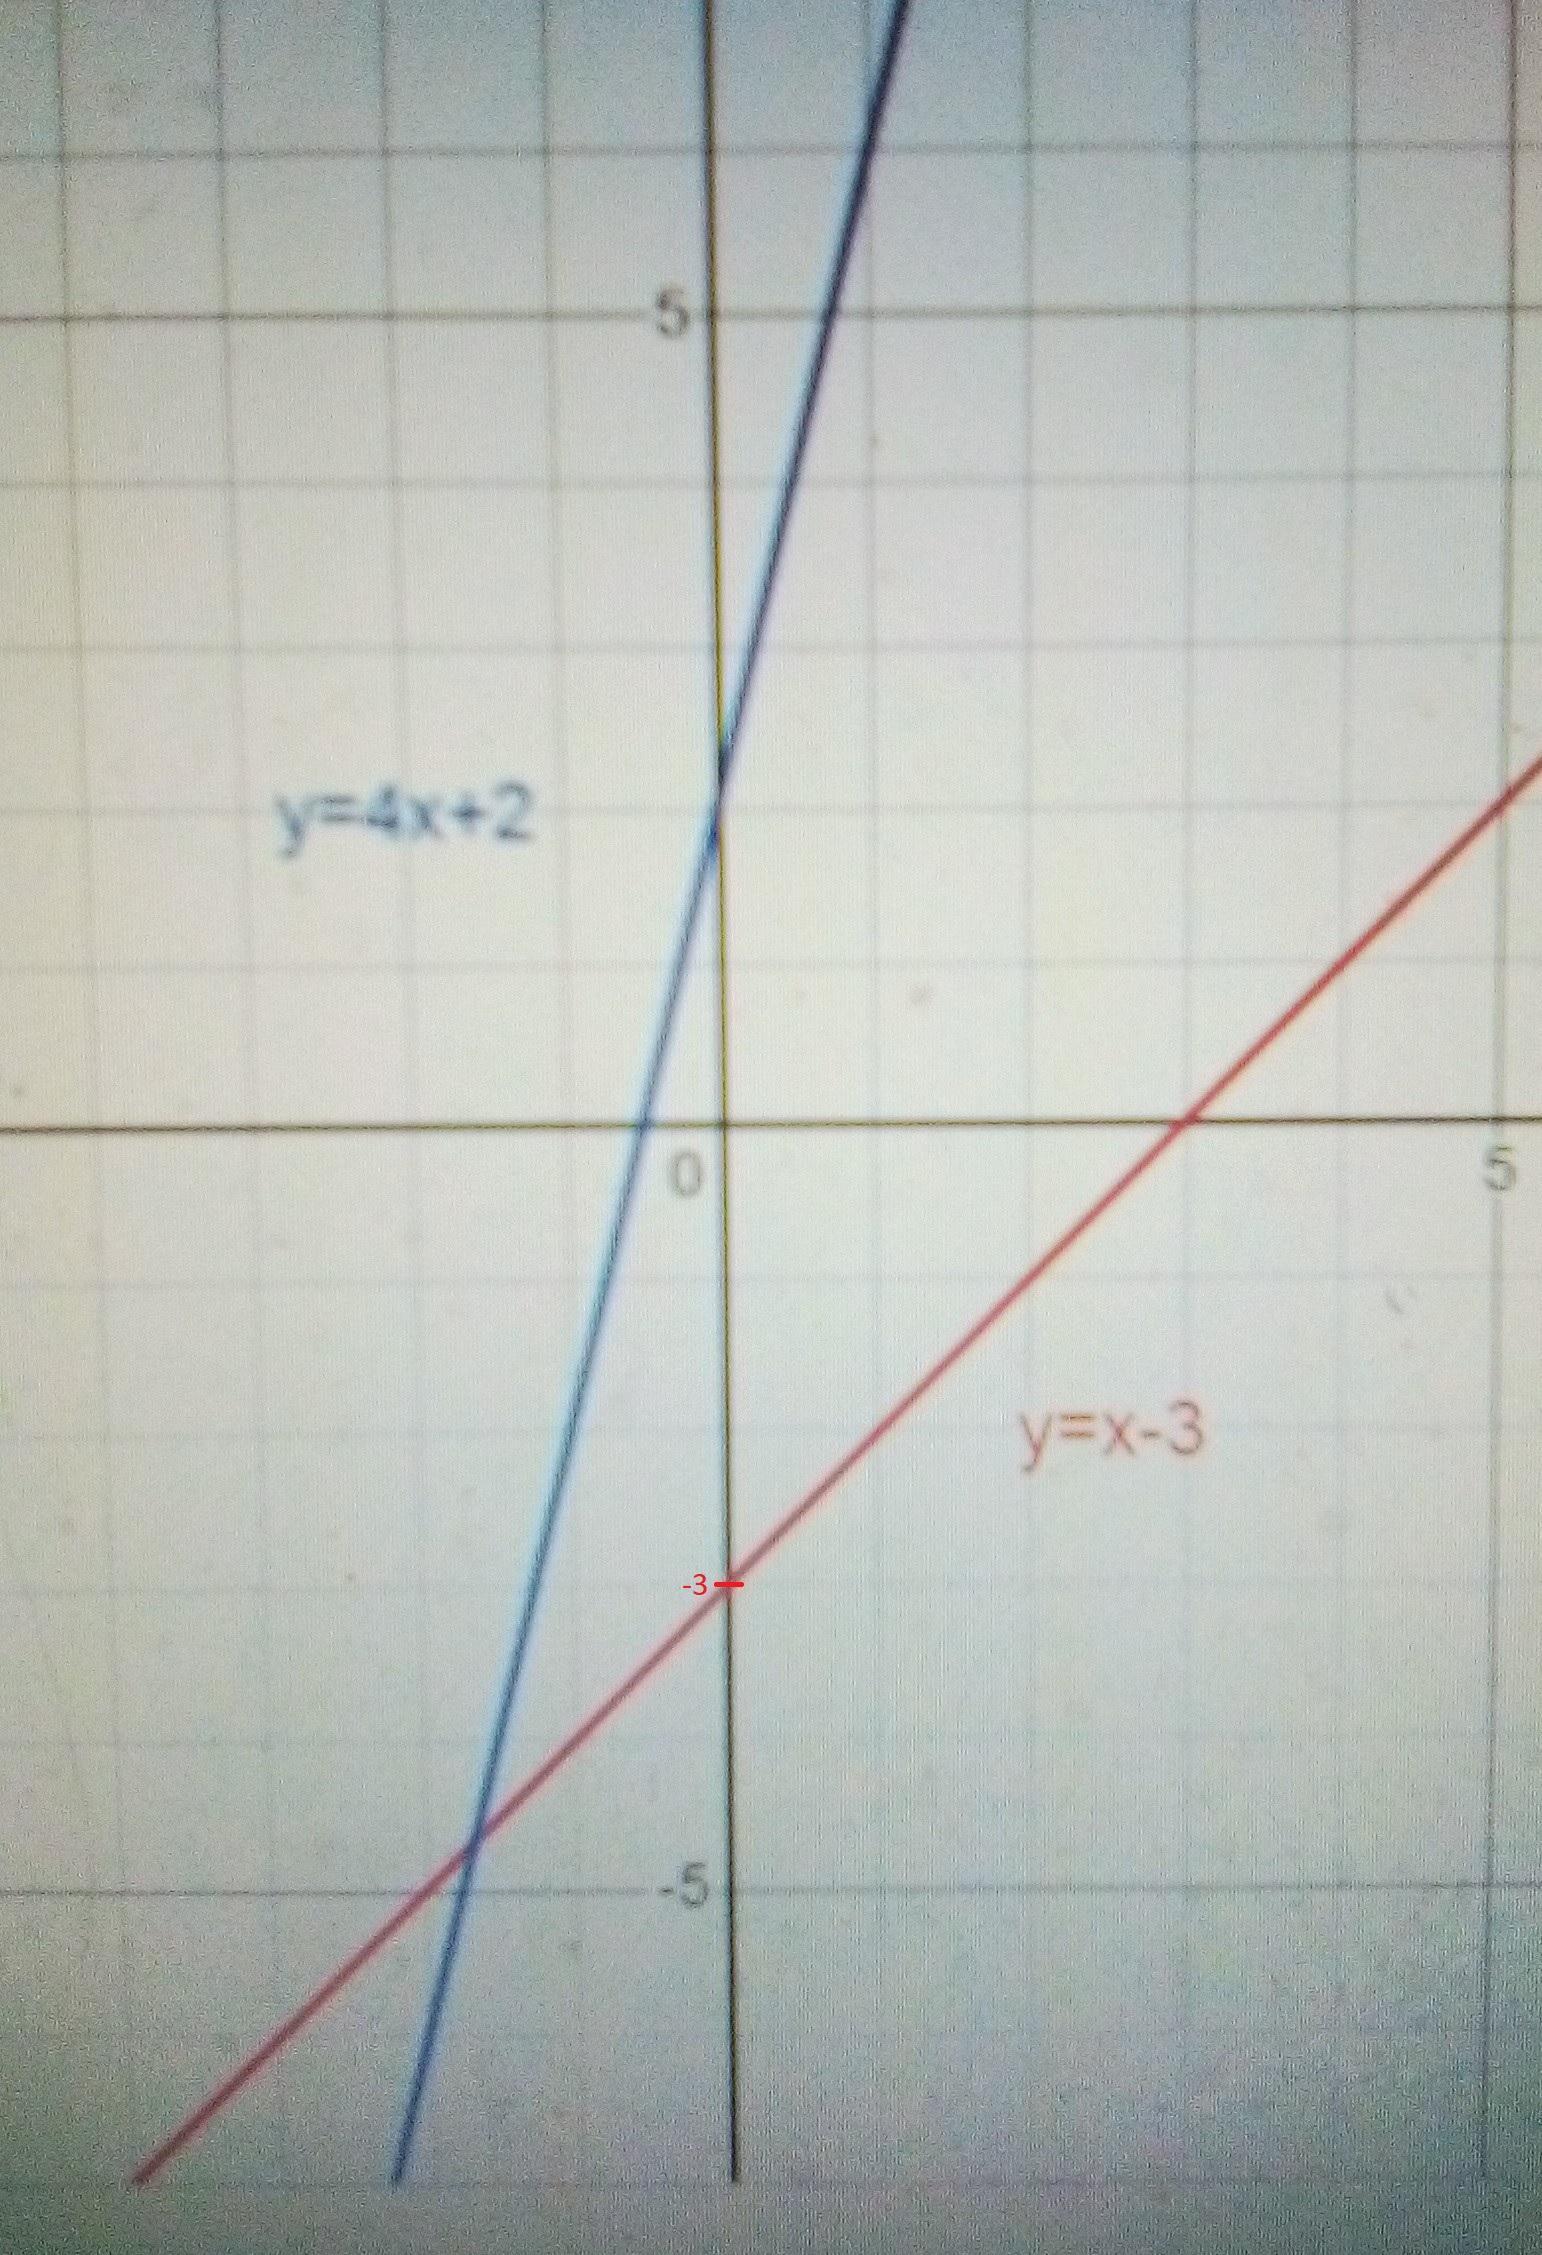 1. What Is The X Intercept Of The Graph Y=x-32. What Is The Y Intercept Of The Graph Y=x-33. What Is